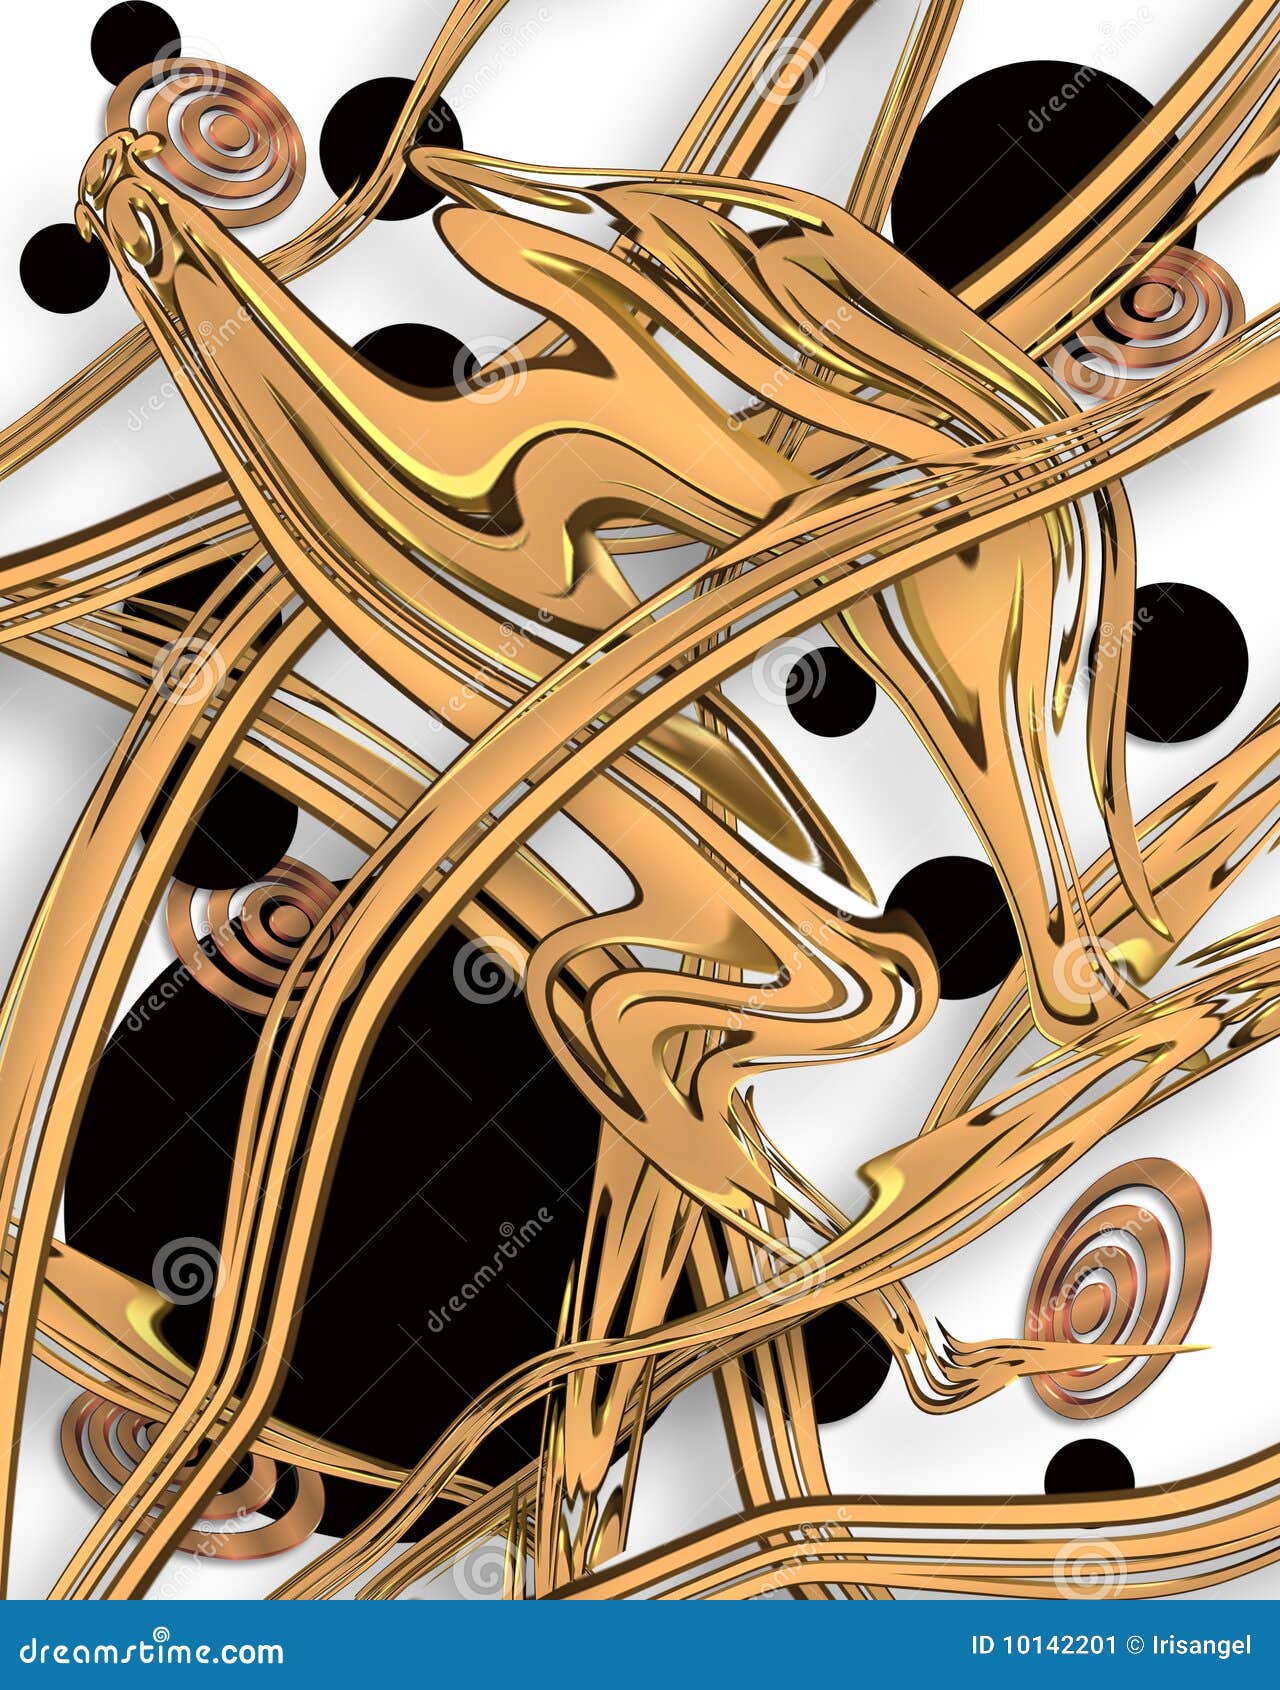 Modern Art Gold And Black Abstract Stock Illustration - Illustration Of  Deco, Modernistic: 10142201